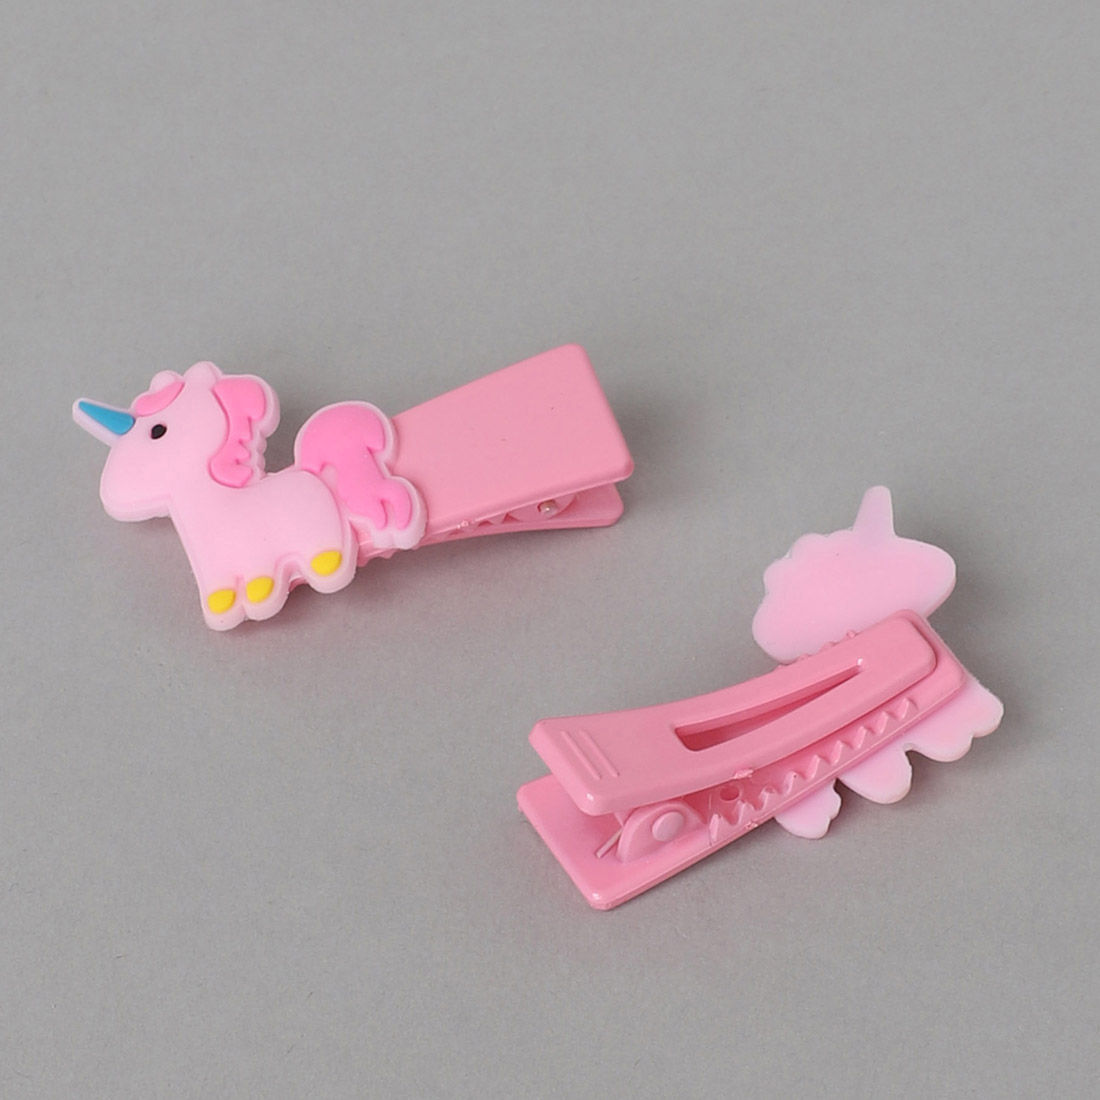 VikriDA Unicorn Hair Clips Little Pony Colorful Artificial Hair Extension  Clips with Glossy Shiny Pack of 2  JioMart